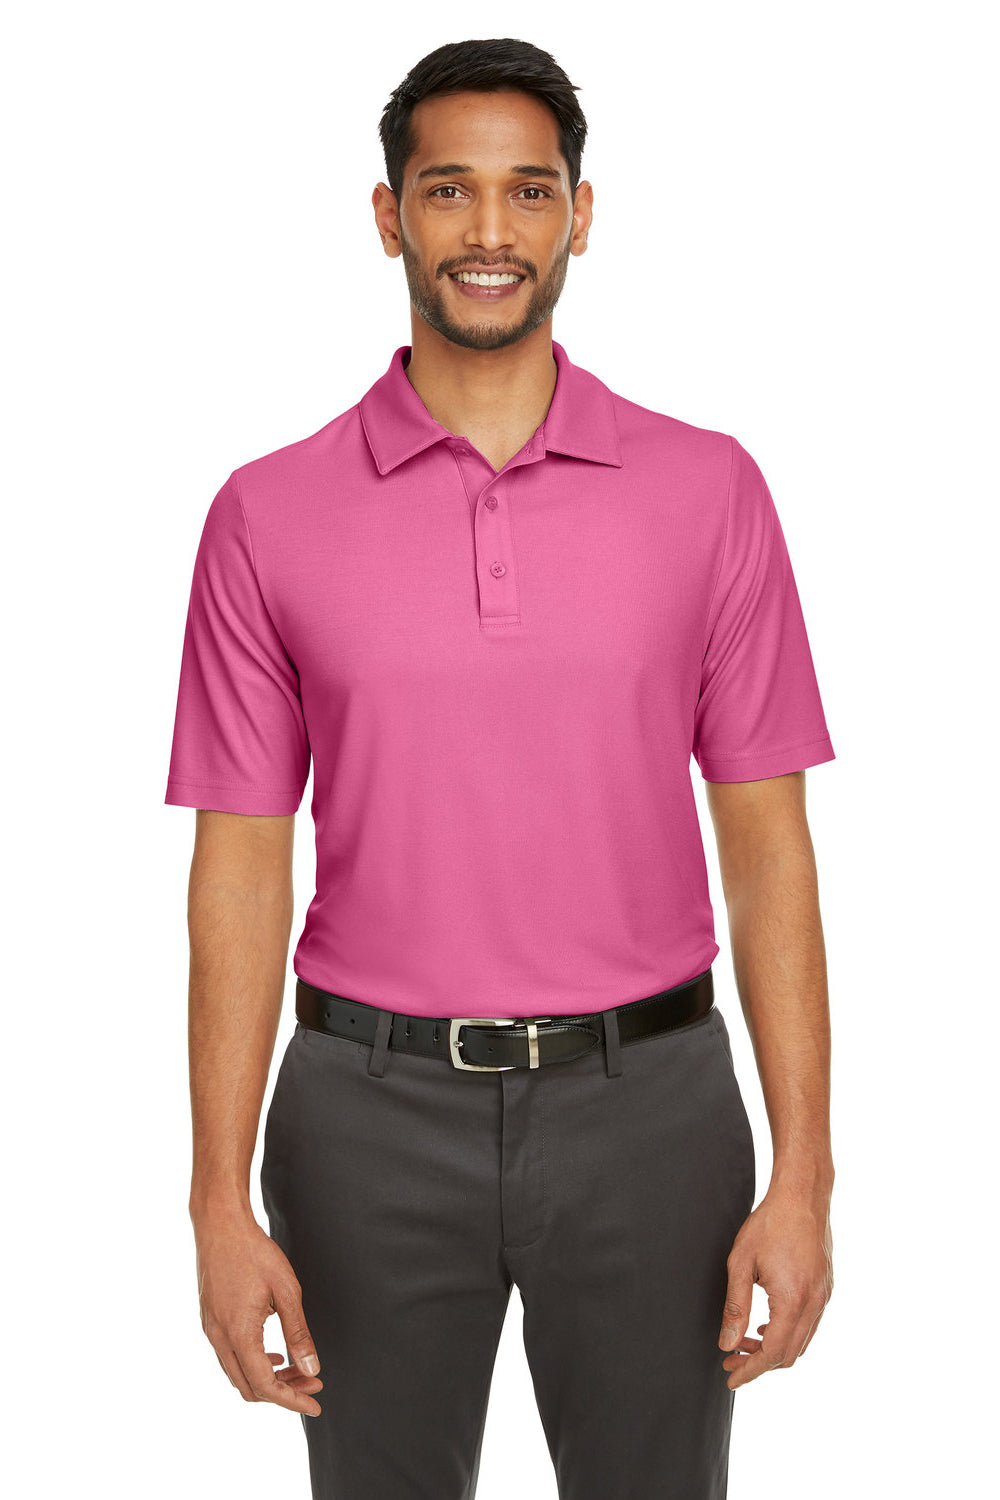 Core 365 CE112 Mens Fusion ChromaSoft Performance Moisture Wicking Short Sleeve Polo Shirt Charity Pink Front